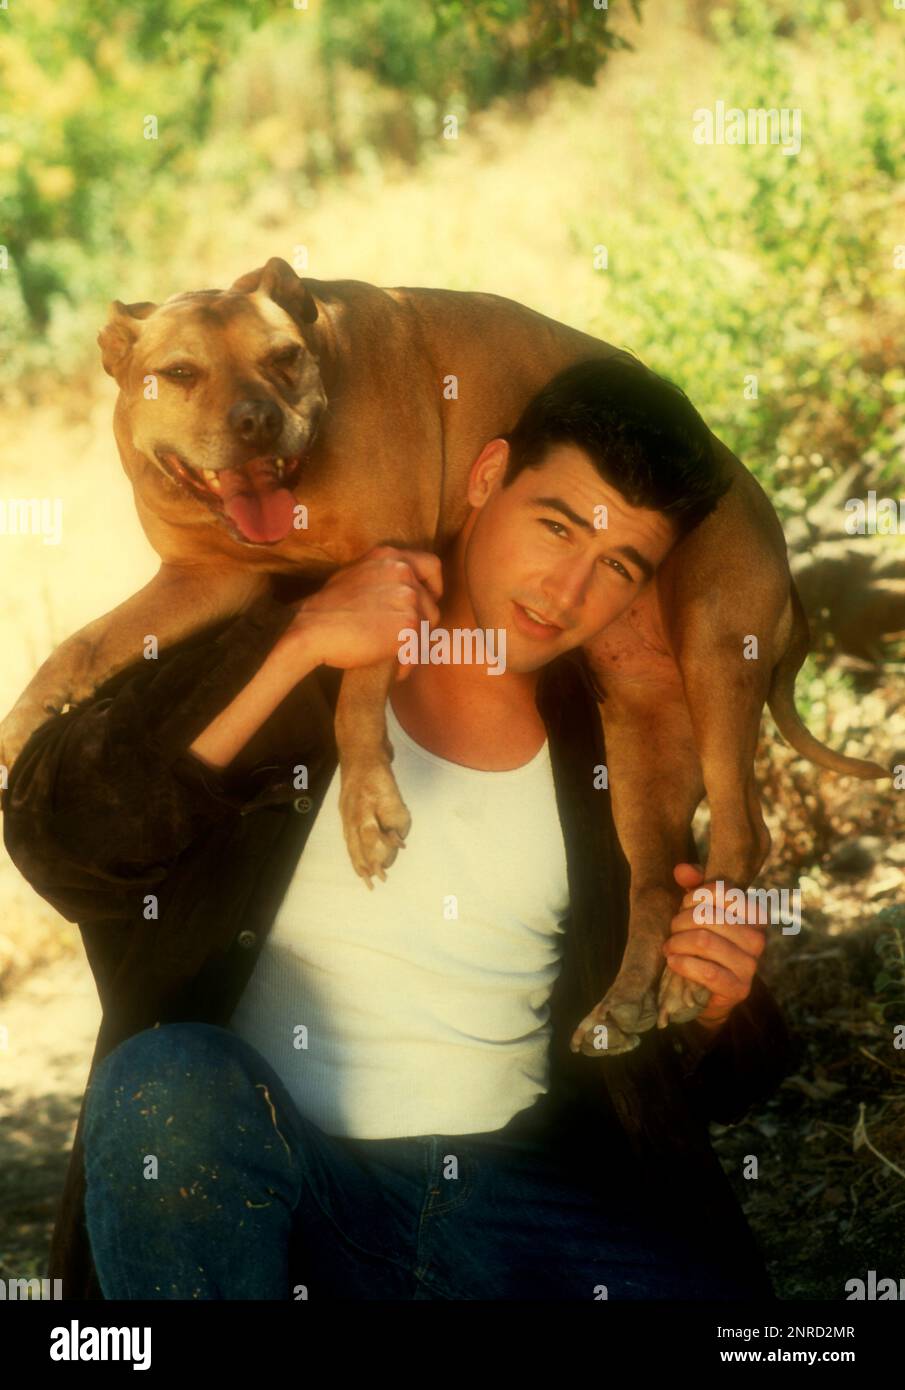 Los Angeles, California, USA 1st July 1996 (EXCLUSIVE) Actor Kyle Candler poses with his dog at an exclusive photo shoot on July 1, 1996 in Los Angeles, California, USA. Photo by Barry King/Alamy Stock Photo Stock Photo